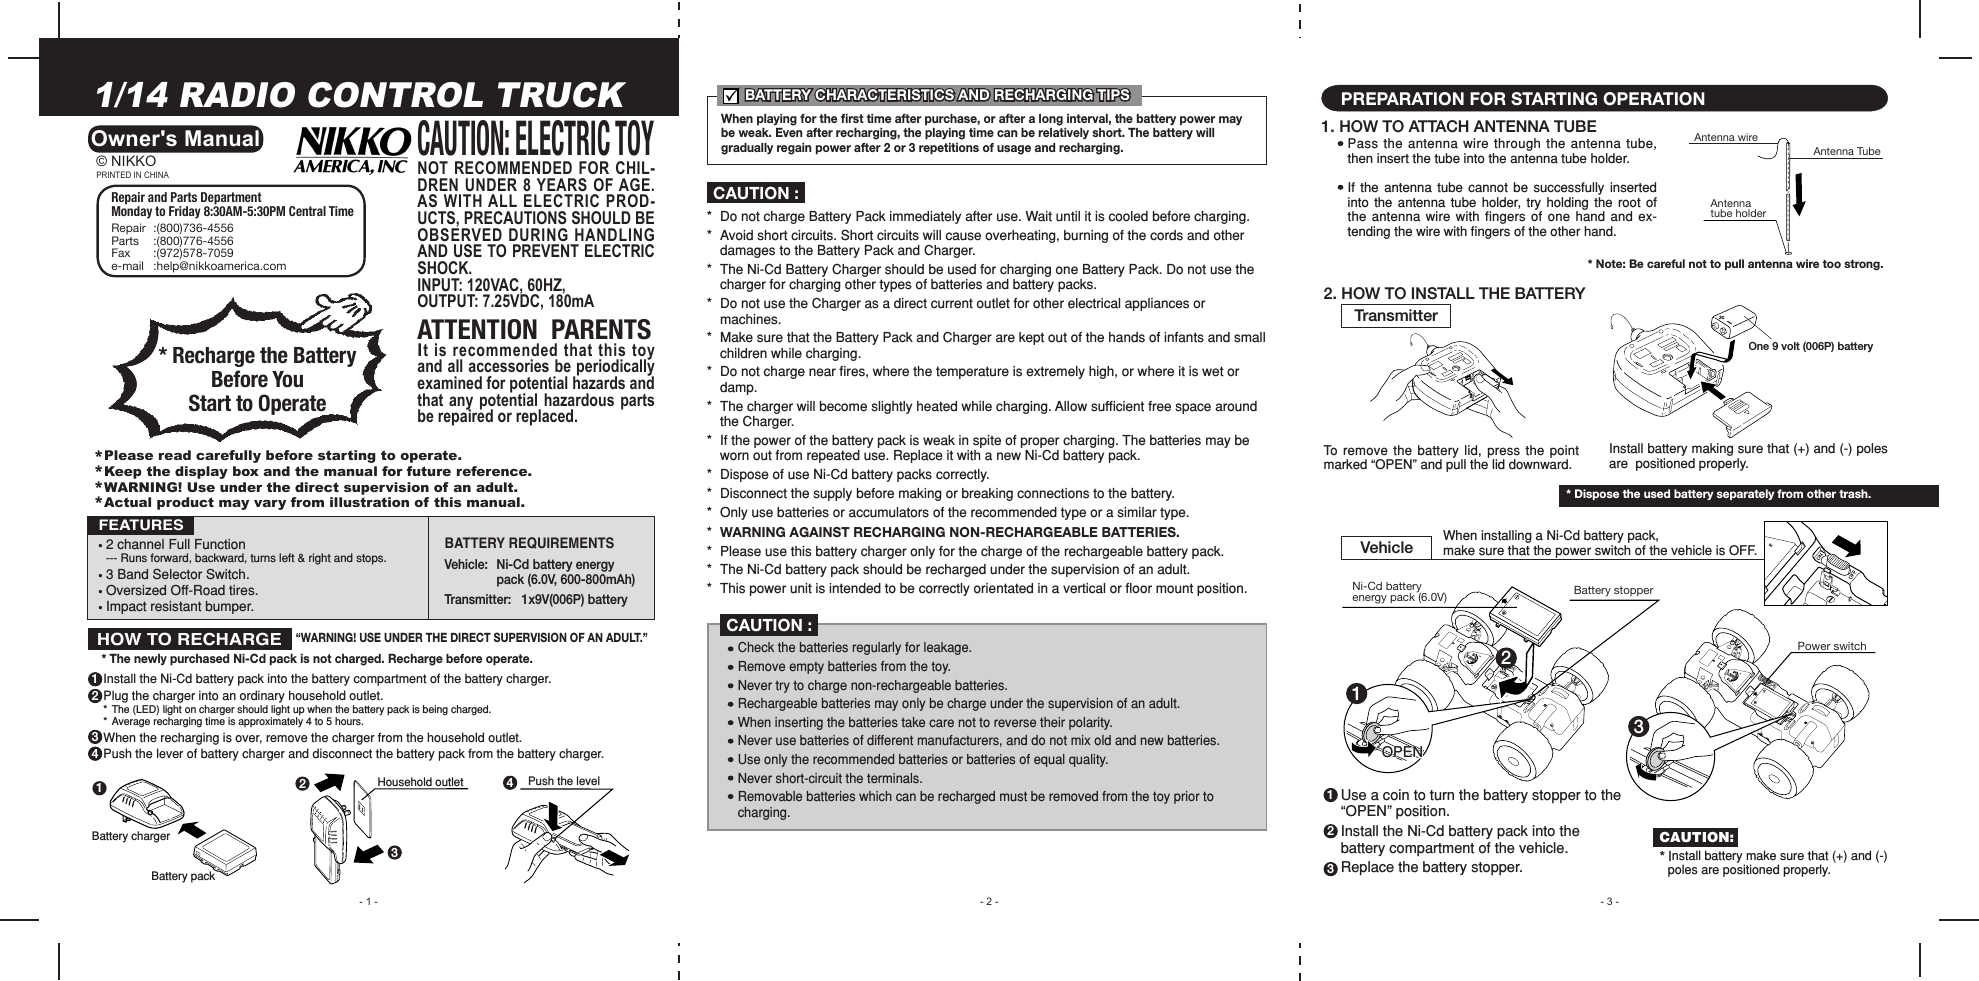 - 1 -1/14 RADIO CONTROL TRUCKOwner&apos;s Manual• 2 channel Full Function --- Runs forward, backward, turns left &amp; right and stops.• 3 Band Selector Switch.• Oversized Off-Road tires.• Impact resistant bumper.FEATURES- 3 -- 2 -1. HOW TO ATTACH ANTENNA TUBEPREPARATION FOR STARTING OPERATIONPass  the  antenna  wire  through  the  antenna  tube, then insert the tube into the antenna tube holder.If  the  antenna  tube  cannot  be  successfully  inserted into  the  antenna  tube  holder, try  holding  the  root  of the antenna wire  with fingers of  one hand and ex-tending the wire with ﬁngers of the other hand.2. HOW TO INSTALL THE BATTERYTo remove the  battery  lid, press the  point marked “OPEN” and pull the lid downward.TransmitterVehicle When installing a Ni-Cd battery pack, make sure that the power switch of the vehicle is OFF.*  Do not charge Battery Pack immediately after use. Wait until it is cooled before charging.*  Avoid short circuits. Short circuits will cause overheating, burning of the cords and other    damages to the Battery Pack and Charger.*  The Ni-Cd Battery Charger should be used for charging one Battery Pack. Do not use the    charger for charging other types of batteries and battery packs.*  Do not use the Charger as a direct current outlet for other electrical appliances or      machines.*  Make sure that the Battery Pack and Charger are kept out of the hands of infants and small    children while charging.*  Do not charge near ﬁres, where the temperature is extremely high, or where it is wet or    damp.*  The charger will become slightly heated while charging. Allow sufﬁcient free space around    the Charger.*  If the power of the battery pack is weak in spite of proper charging. The batteries may be    worn out from repeated use. Replace it with a new Ni-Cd battery pack.*  Dispose of use Ni-Cd battery packs correctly.*  Disconnect the supply before making or breaking connections to the battery.*  Only use batteries or accumulators of the recommended type or a similar type.*  WARNING AGAINST RECHARGING NON-RECHARGEABLE BATTERIES.*  Please use this battery charger only for the charge of the rechargeable battery pack.*  The Ni-Cd battery pack should be recharged under the supervision of an adult.*  This power unit is intended to be correctly orientated in a vertical or ﬂoor mount position.Check the batteries regularly for leakage.Remove empty batteries from the toy.Never try to charge non-rechargeable batteries.Rechargeable batteries may only be charge under the supervision of an adult.When inserting the batteries take care not to reverse their polarity.Never use batteries of different manufacturers, and do not mix old and new batteries.Use only the recommended batteries or batteries of equal quality.Never short-circuit the terminals.Removable batteries which can be recharged must be removed from the toy prior to charging.CAUTION :CAUTION :NOT RECOMMENDED FOR CHIL-DREN  UNDER  8  YEARS  OF AGE. AS WITH ALL ELECTRIC PROD-UCTS, PRECAUTIONS SHOULD BE OBSERVED DURING HANDLING AND USE TO PREVENT ELECTRIC SHOCK.INPUT: 120VAC, 60HZ,OUTPUT: 7.25VDC, 180mAATTENTION  PARENTSIt is recommended that this toy and all accessories be periodically examined for potential hazards and that  any  potential  hazardous  parts be repaired or replaced.CAUTION: ELECTRIC TOYBATTERY REQUIREMENTS Vehicle:   Ni-Cd battery energy    pack (6.0V, 600-800mAh)Transmitter:   1x9V(006P) battery Repair and Parts Department Monday to Friday 8:30AM-5:30PM Central TimeRepair  :(800)736-4556Parts  :(800)776-4556Fax  :(972)578-7059e-mail   :help@nikkoamerica.com* Recharge the Battery Before You Start to OperatePRINTED IN CHINA© NIKKOBATTERY CHARACTERISTICS AND RECHARGING TIPSBATTERY CHARACTERISTICS AND RECHARGING TIPSWhen playing for the ﬁrst time after purchase, or after a long interval, the battery power may be weak. Even after recharging, the playing time can be relatively short. The battery will gradually regain power after 2 or 3 repetitions of usage and recharging.Install the Ni-Cd battery pack into the battery compartment of the battery charger.Plug the charger into an ordinary household outlet.*  The (LED) light on charger should light up when the battery pack is being charged.*  Average recharging time is approximately 4 to 5 hours.When the recharging is over, remove the charger from the household outlet.Push the lever of battery charger and disconnect the battery pack from the battery charger.“WARNING! USE UNDER THE DIRECT SUPERVISION OF AN ADULT.”* The newly purchased Ni-Cd pack is not charged. Recharge before operate.1Battery charger2341234Battery packHousehold outlet Push the levelHOW TO RECHARGE*Please read carefully before starting to operate.*Keep the display box and the manual for future reference.*WARNING! Use under the direct supervision of an adult.*Actual product may vary from illustration of this manual.Antenna tube holderAntenna wireAntenna TubeUse a coin to turn the battery stopper to the “OPEN” position.Install the Ni-Cd battery pack into the battery compartment of the vehicle.Replace the battery stopper.123* Note: Be careful not to pull antenna wire too strong.1Battery stopper23Power switchOPENOne 9 volt (006P) batteryInstall battery making sure that (+) and (-) poles are  positioned properly.* Dispose the used battery separately from other trash.CAUTION:* Install battery make sure that (+) and (-)  poles are positioned properly.Ni-Cd battery energy pack (6.0V)